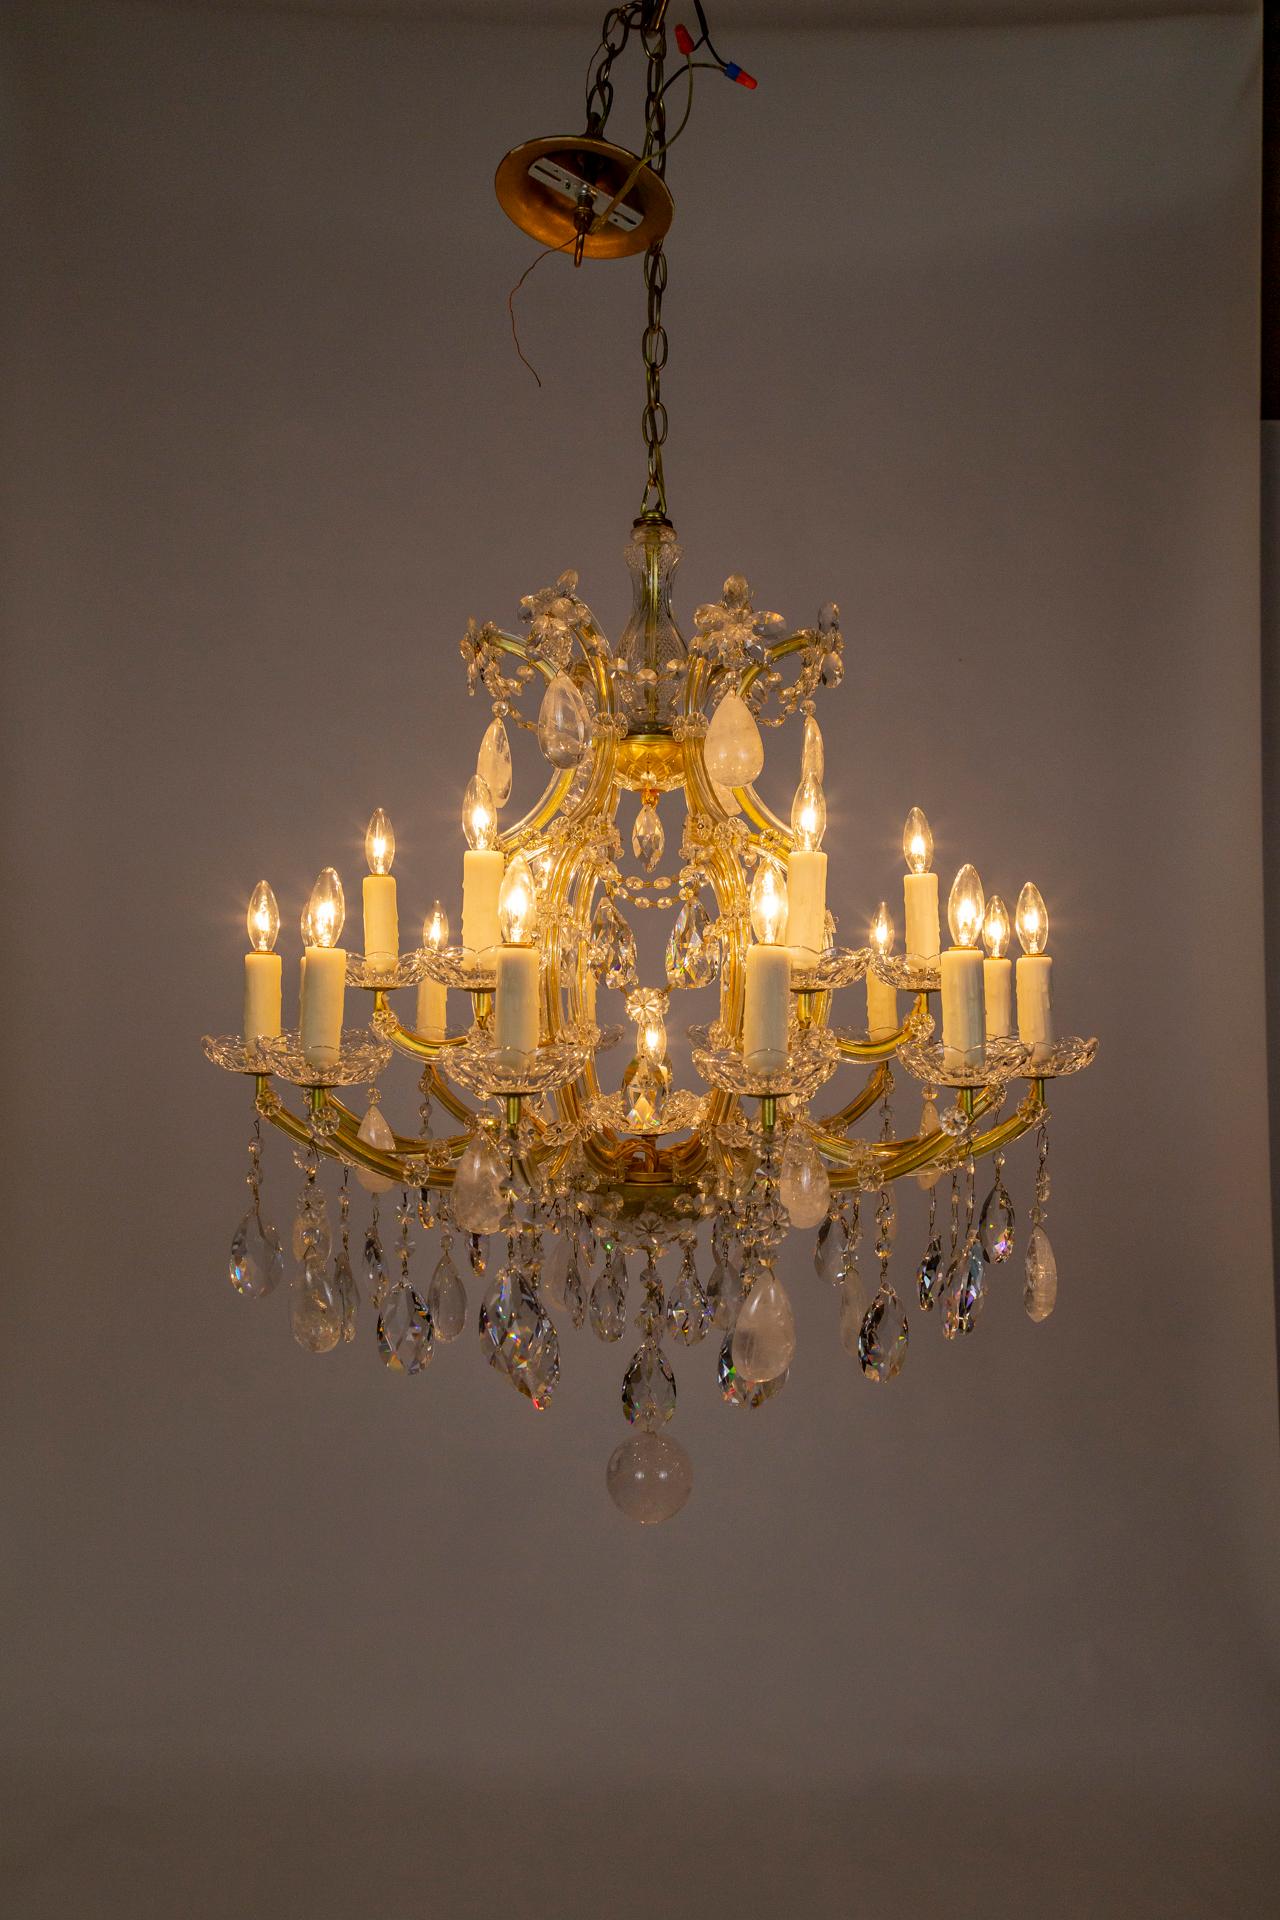 19-Light Rock Crystal Maria Theresa Chandelier For Sale 5